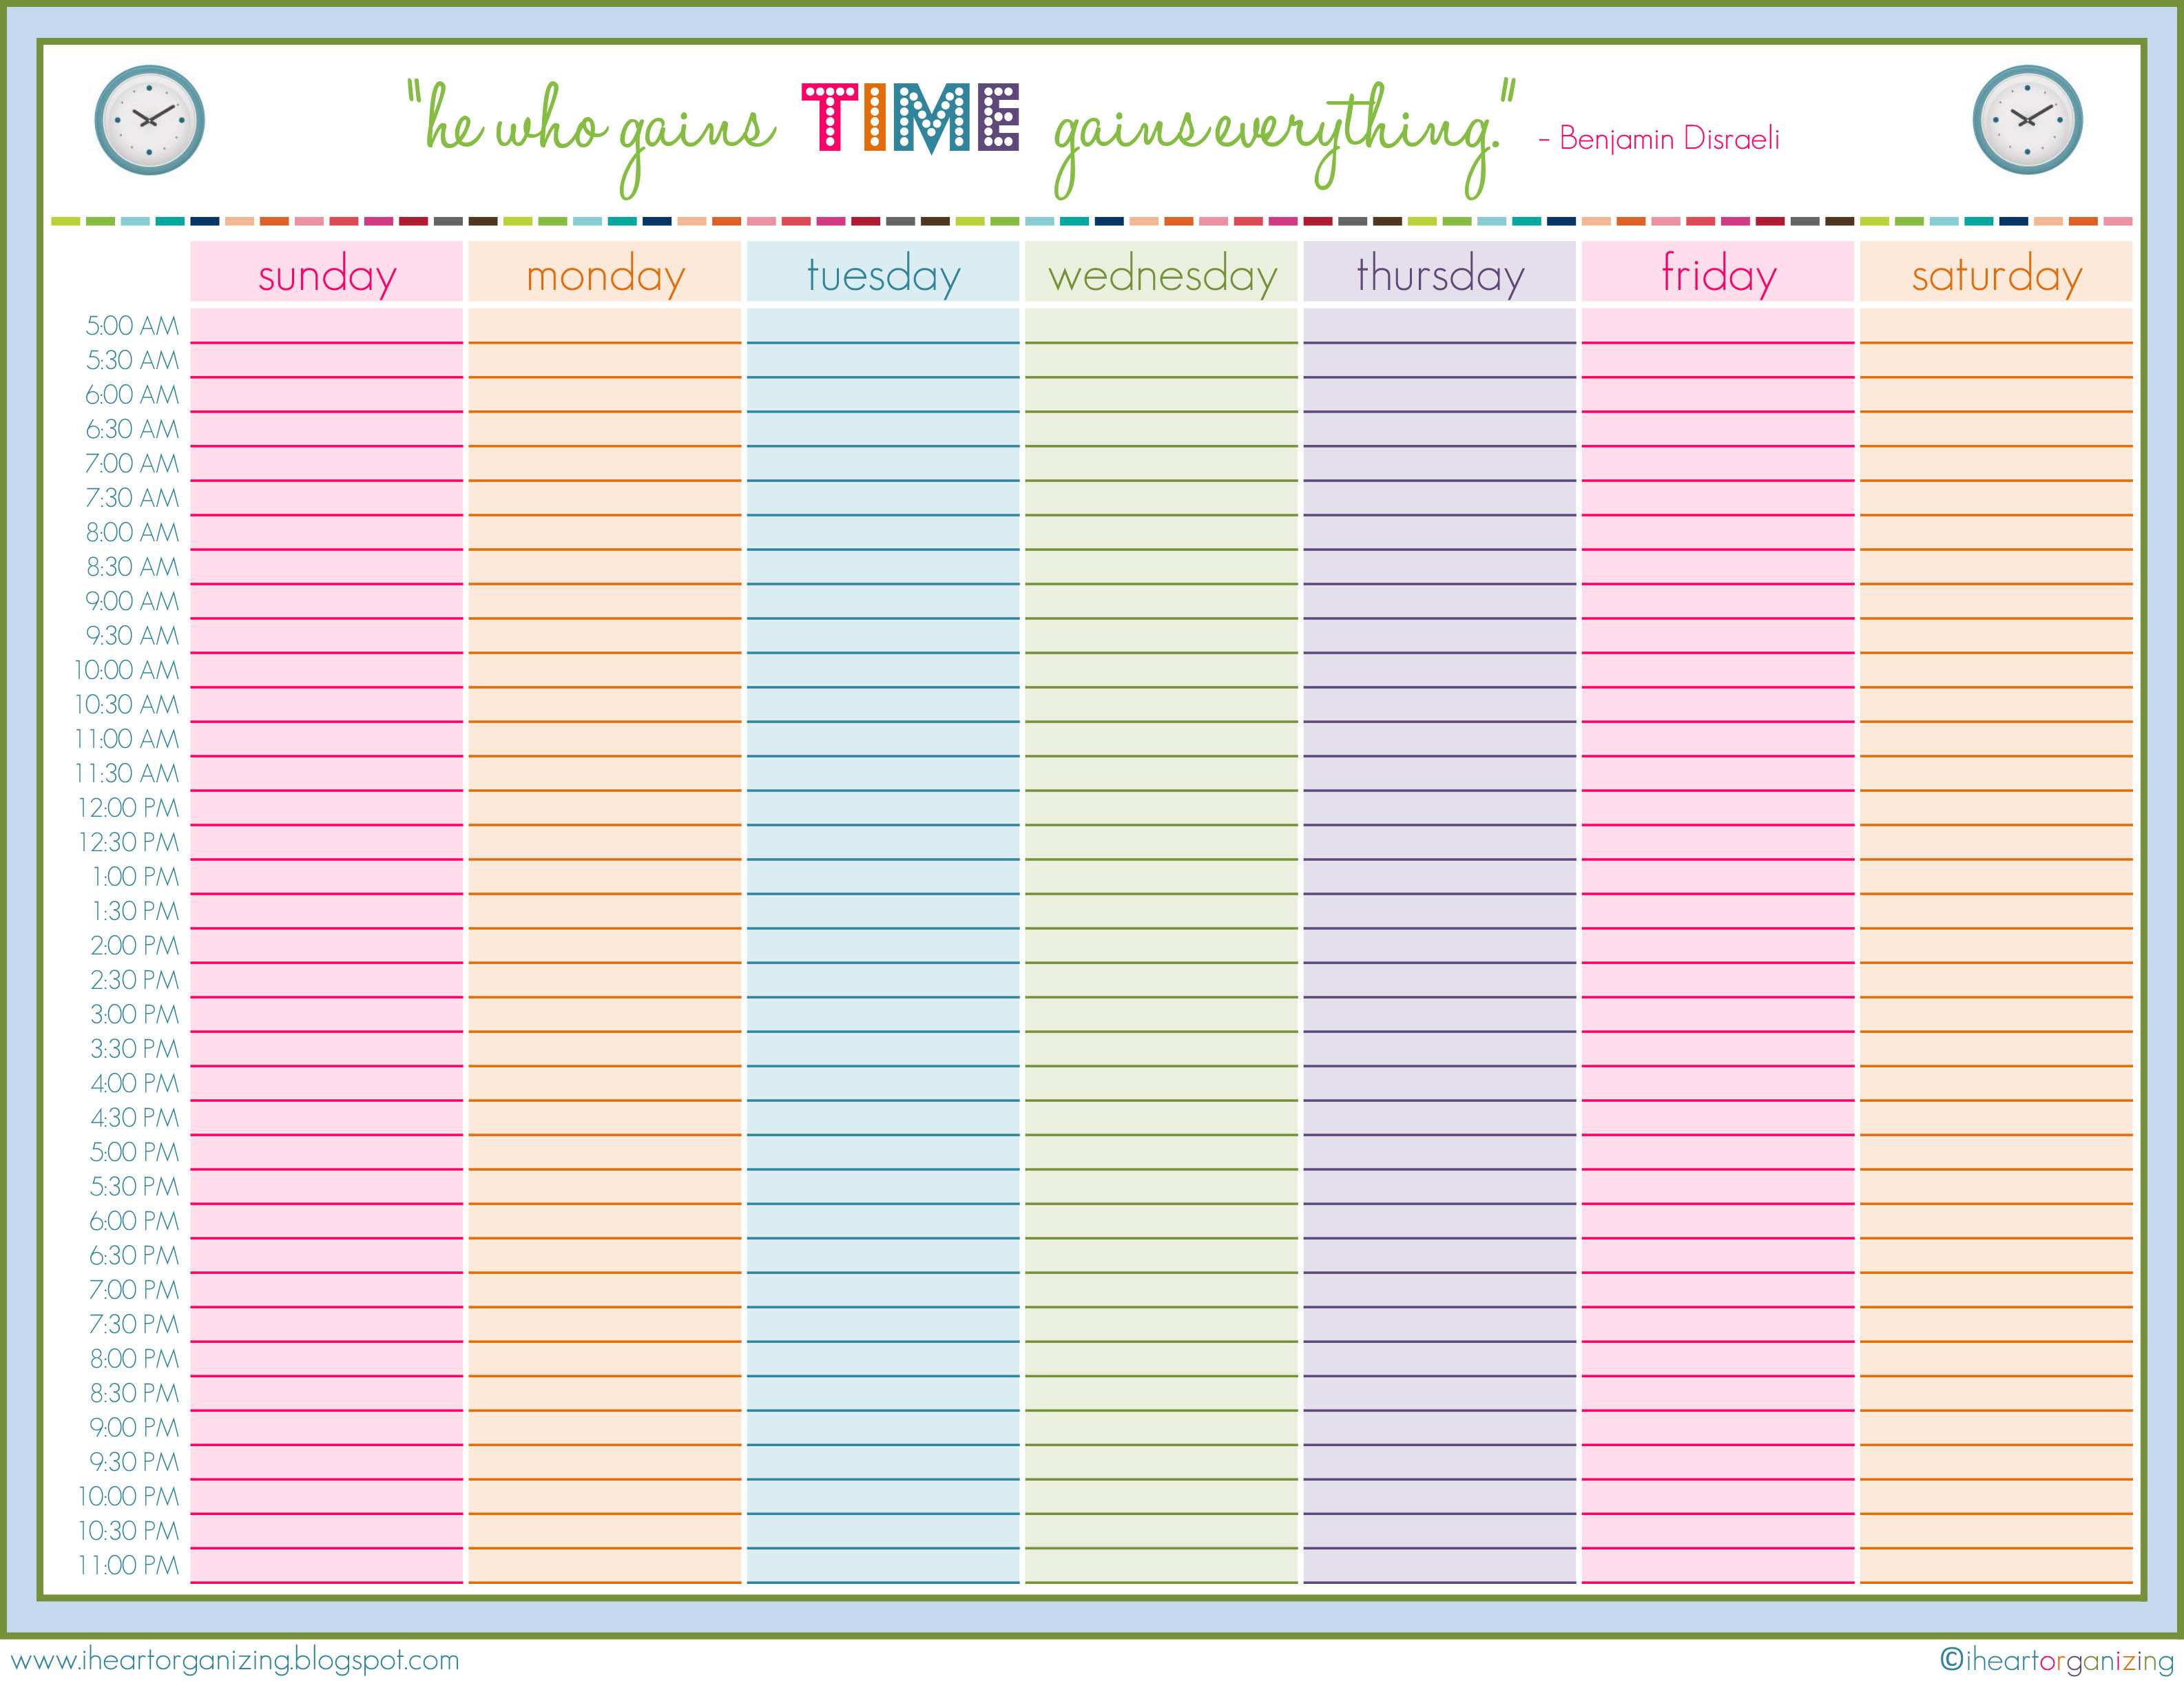 71 Customize Weekly Class Schedule Template Pdf In Photoshop For Weekly 